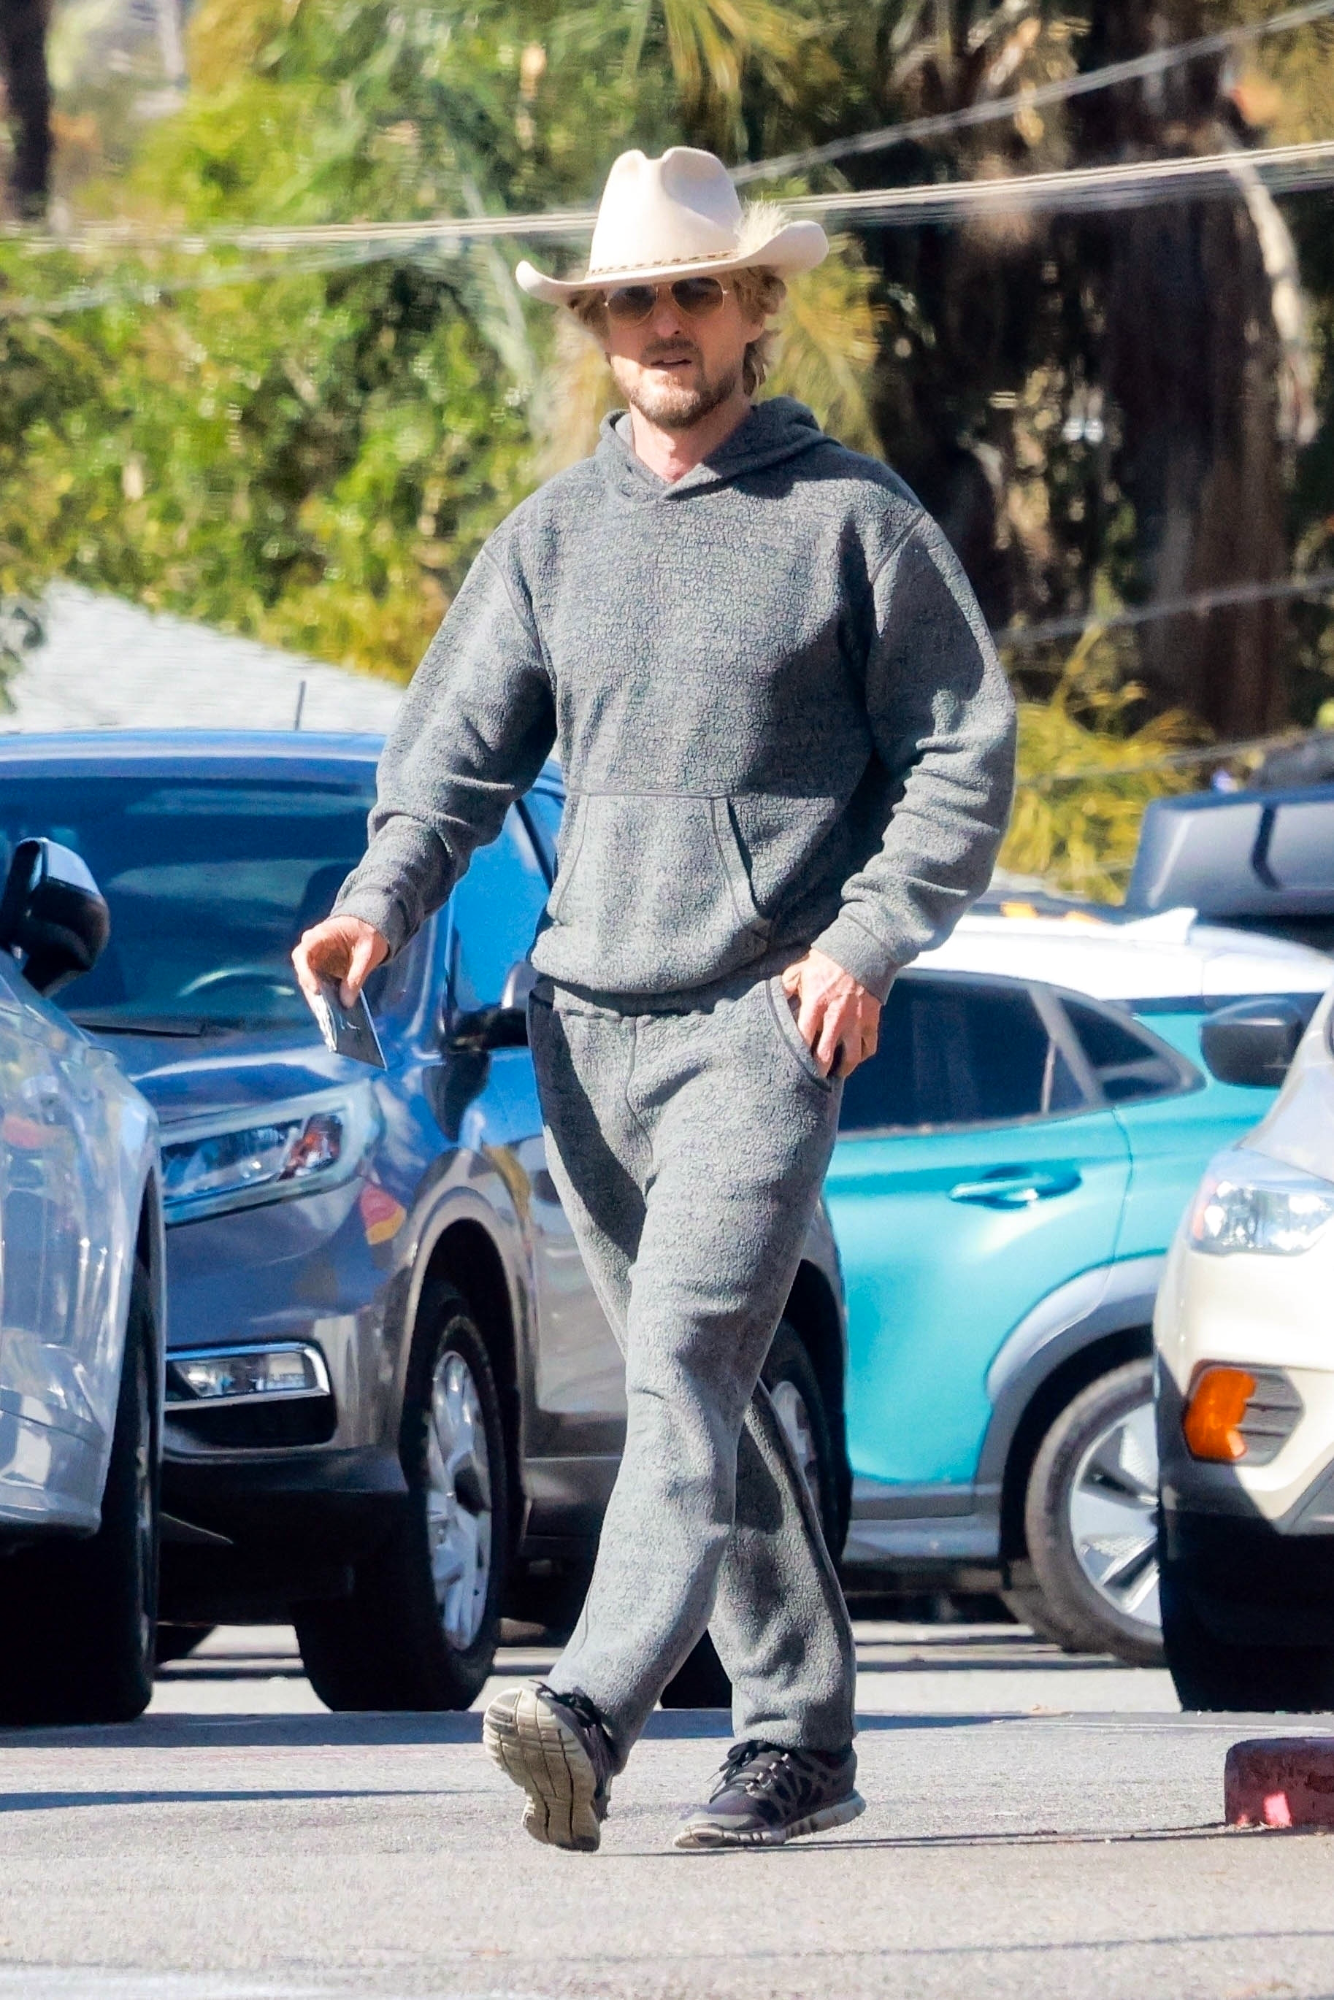 Owen Wilson seen wearing a white cowboy hat with feather & grey sweatsuit with Nike running sneakers